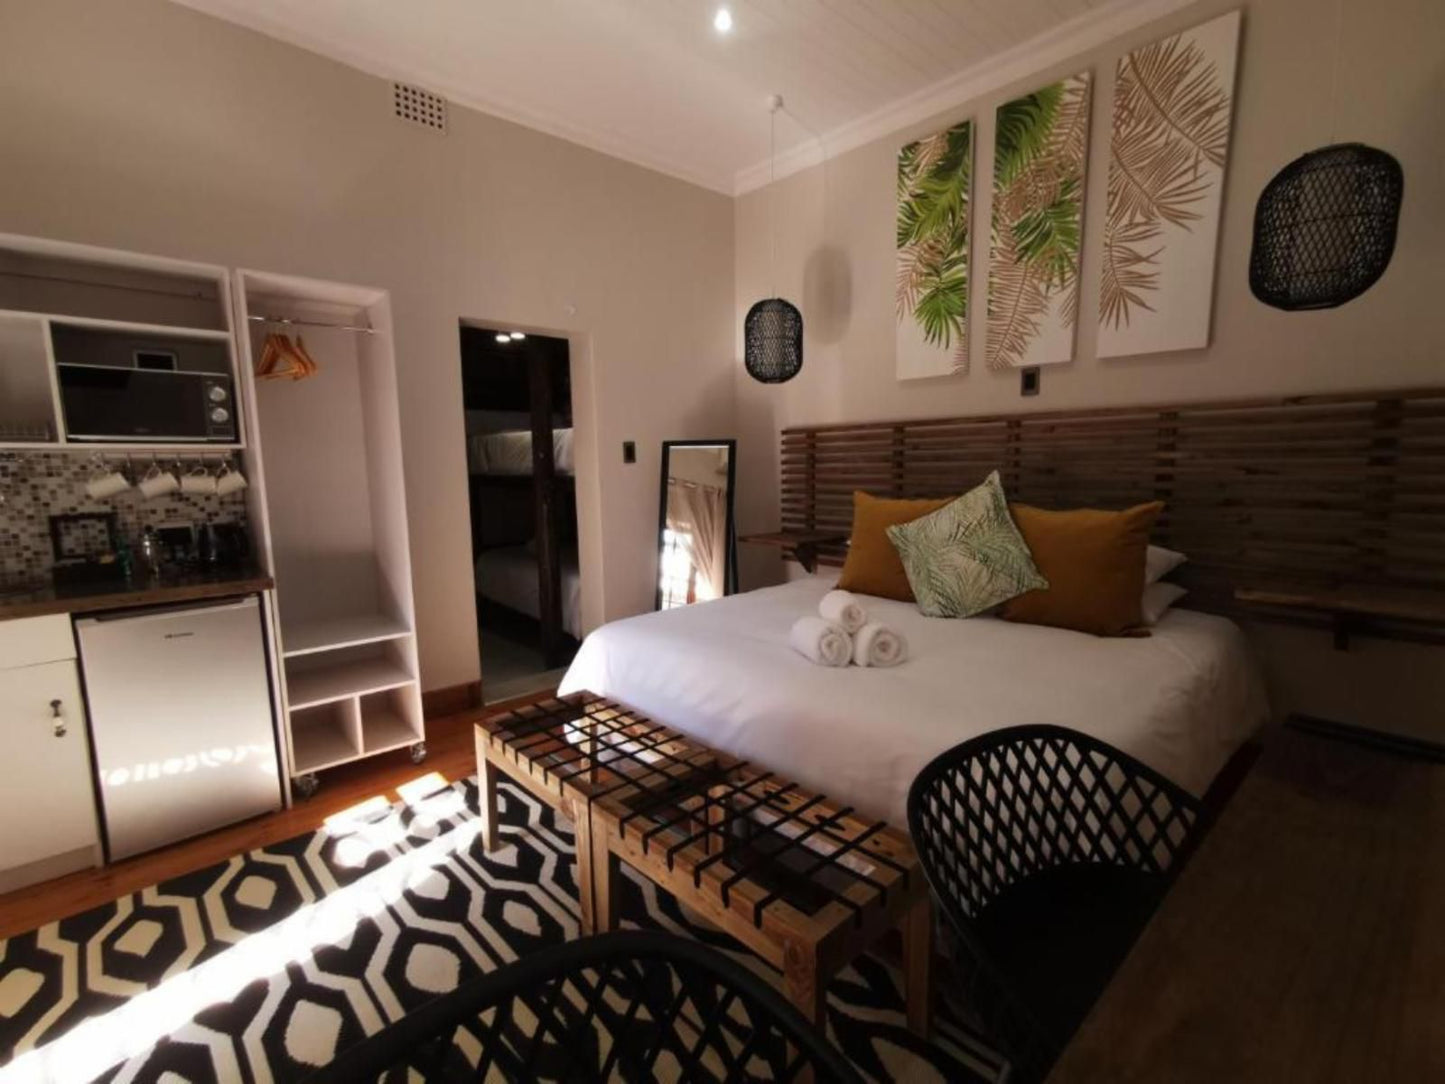 Guest Suites On Connor Willows Bloemfontein Free State South Africa Bedroom